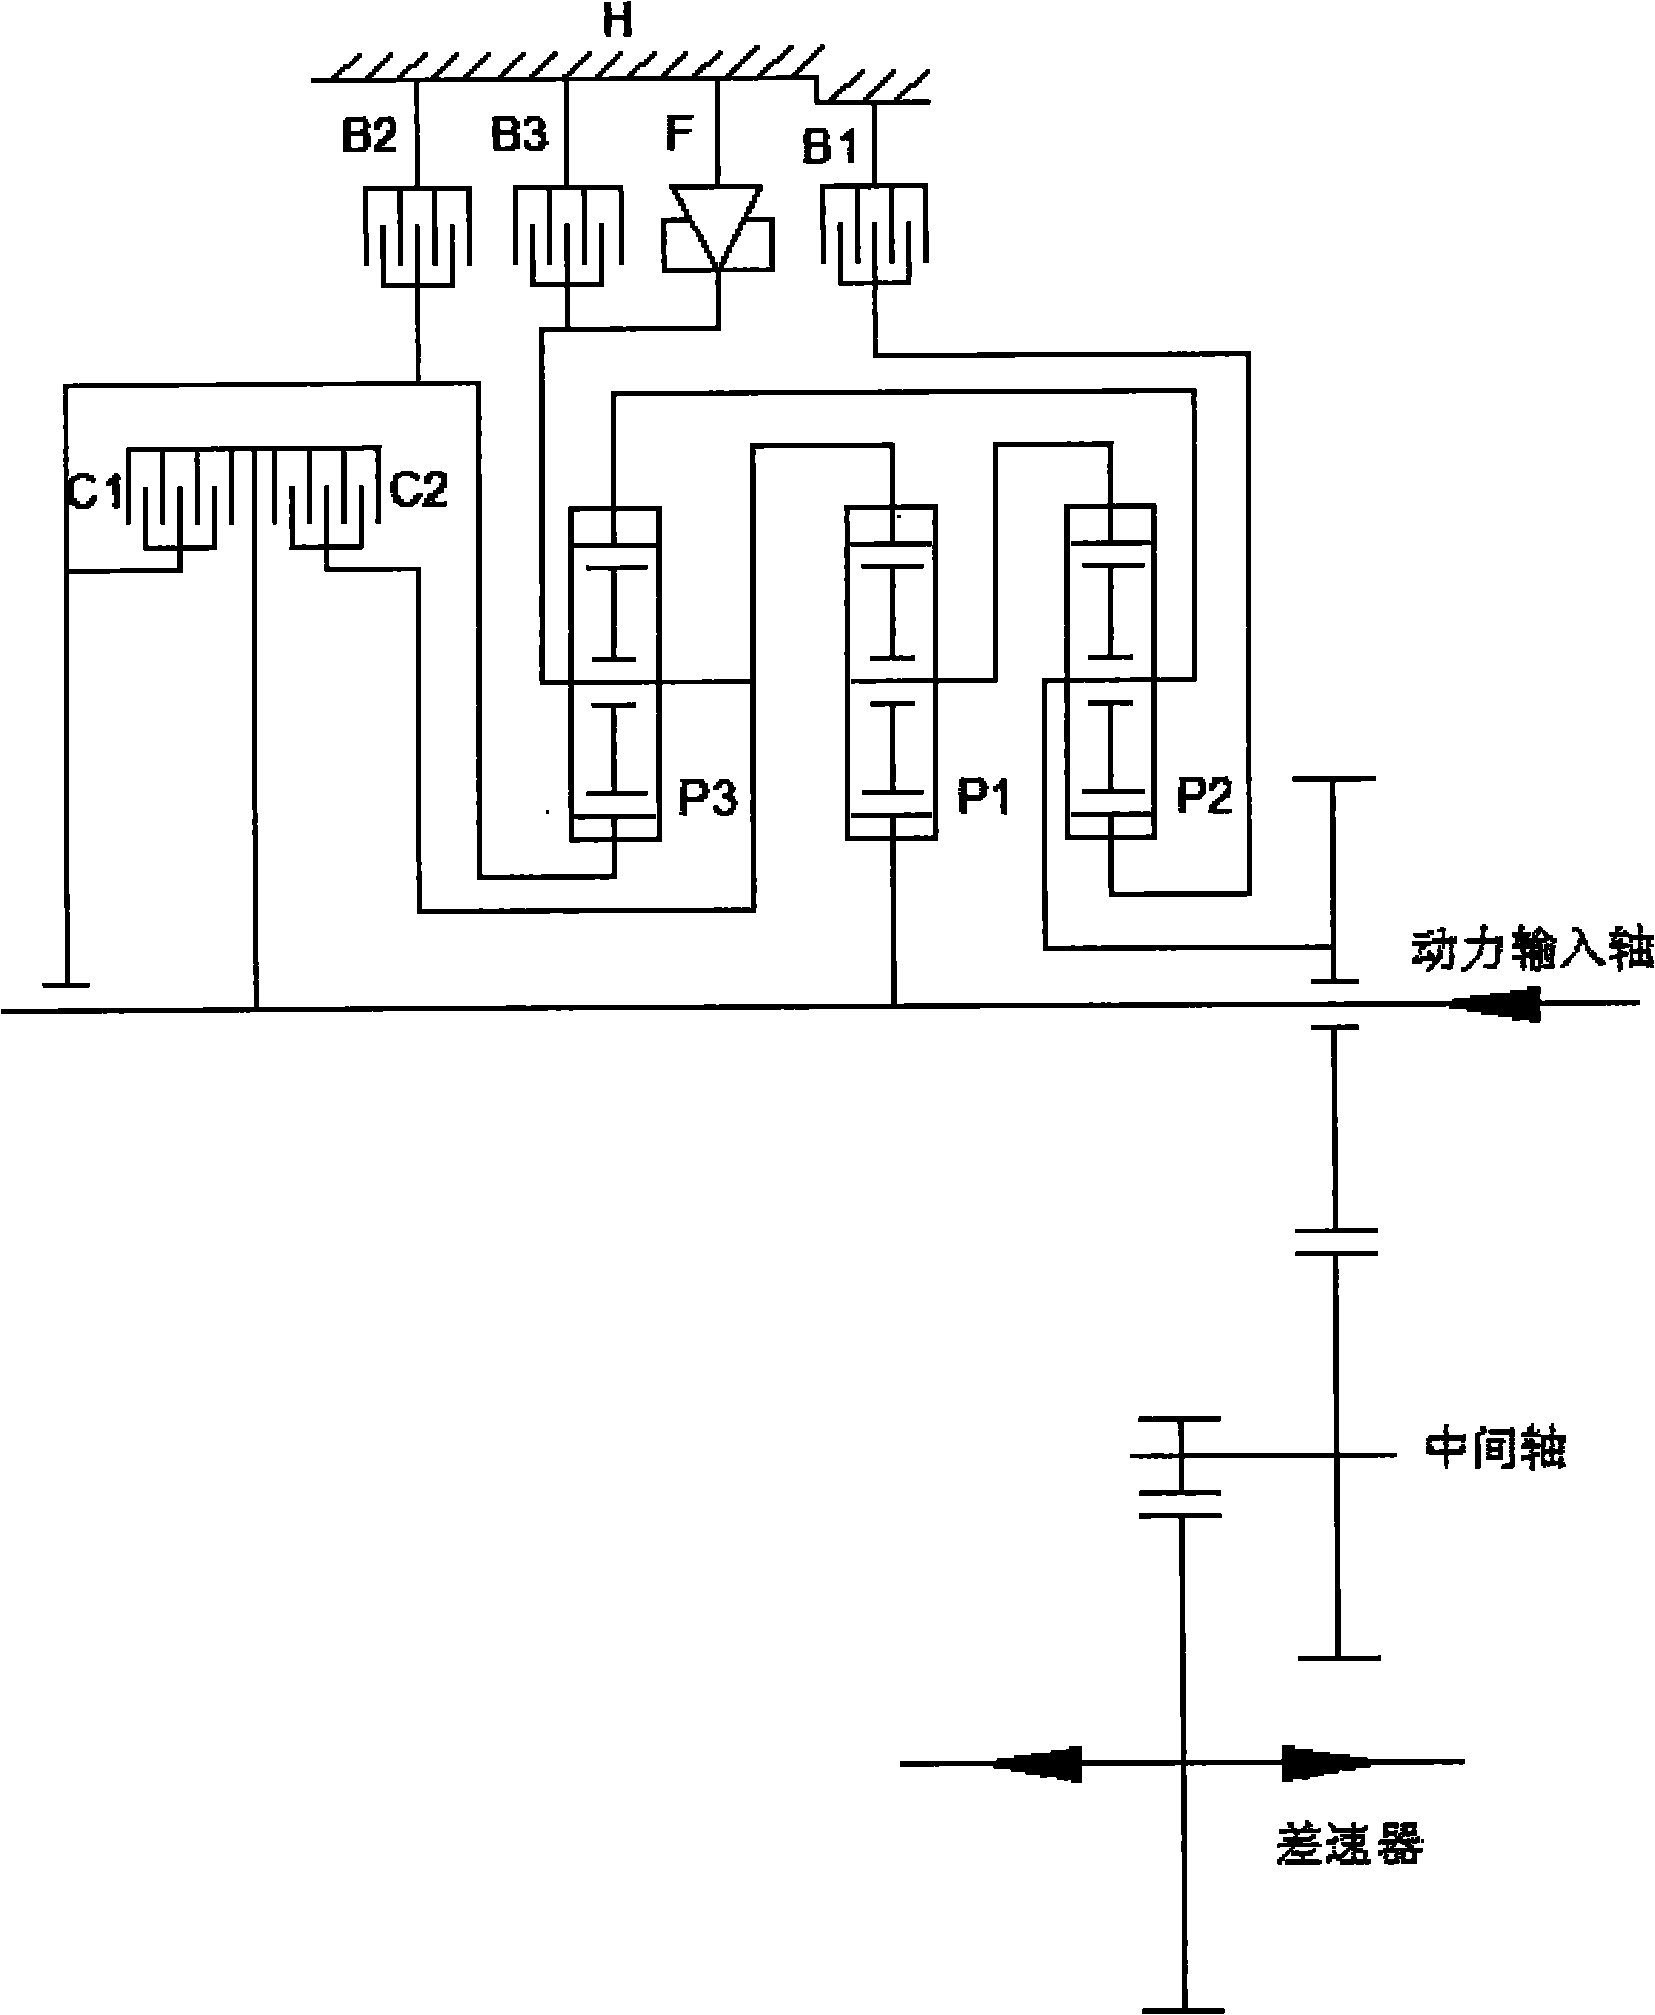 Arrangement of 6AT power drive system